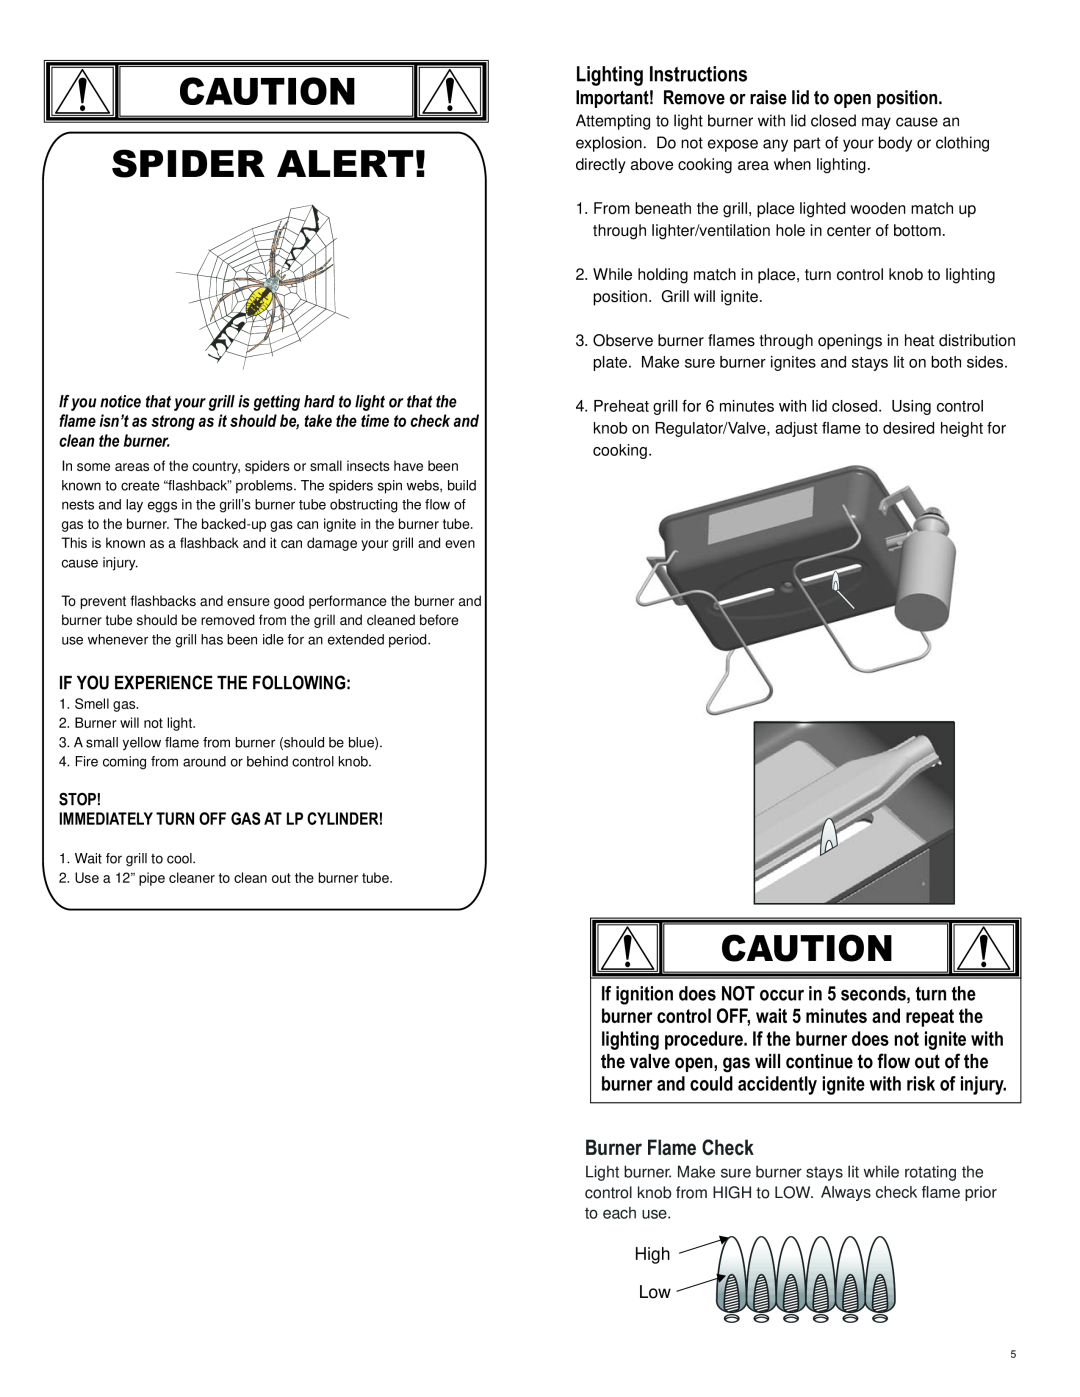 Char-Broil 461111811 manual Lighting Instructions, Burner Flame Check, Important! Remove or raise lid to open position 